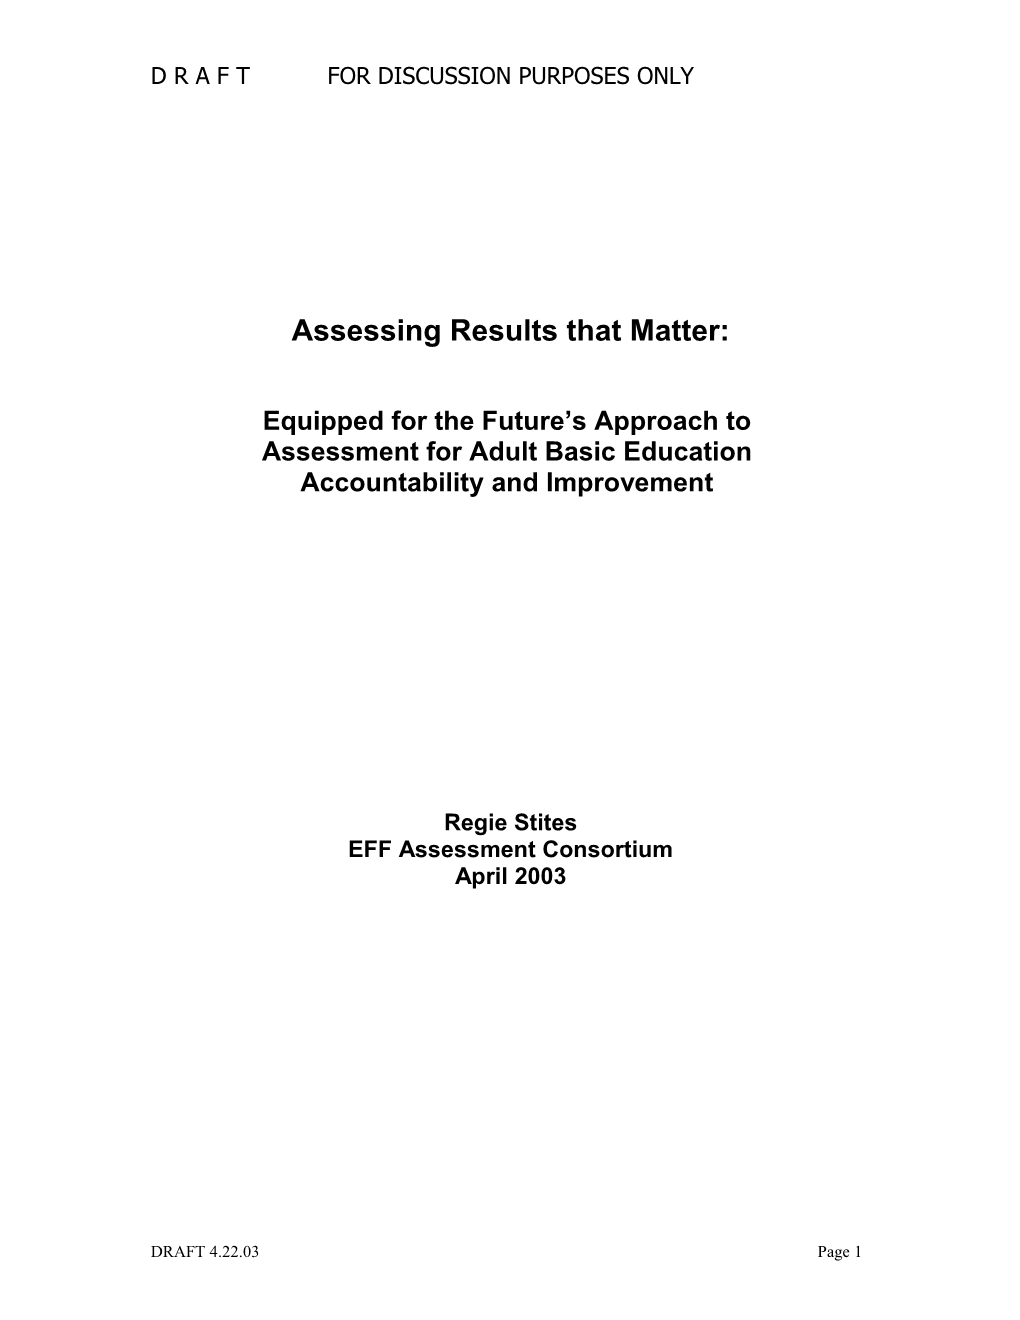 Assessing Results That Matter: Quality Criteria for Alternative Assessments in the Adult